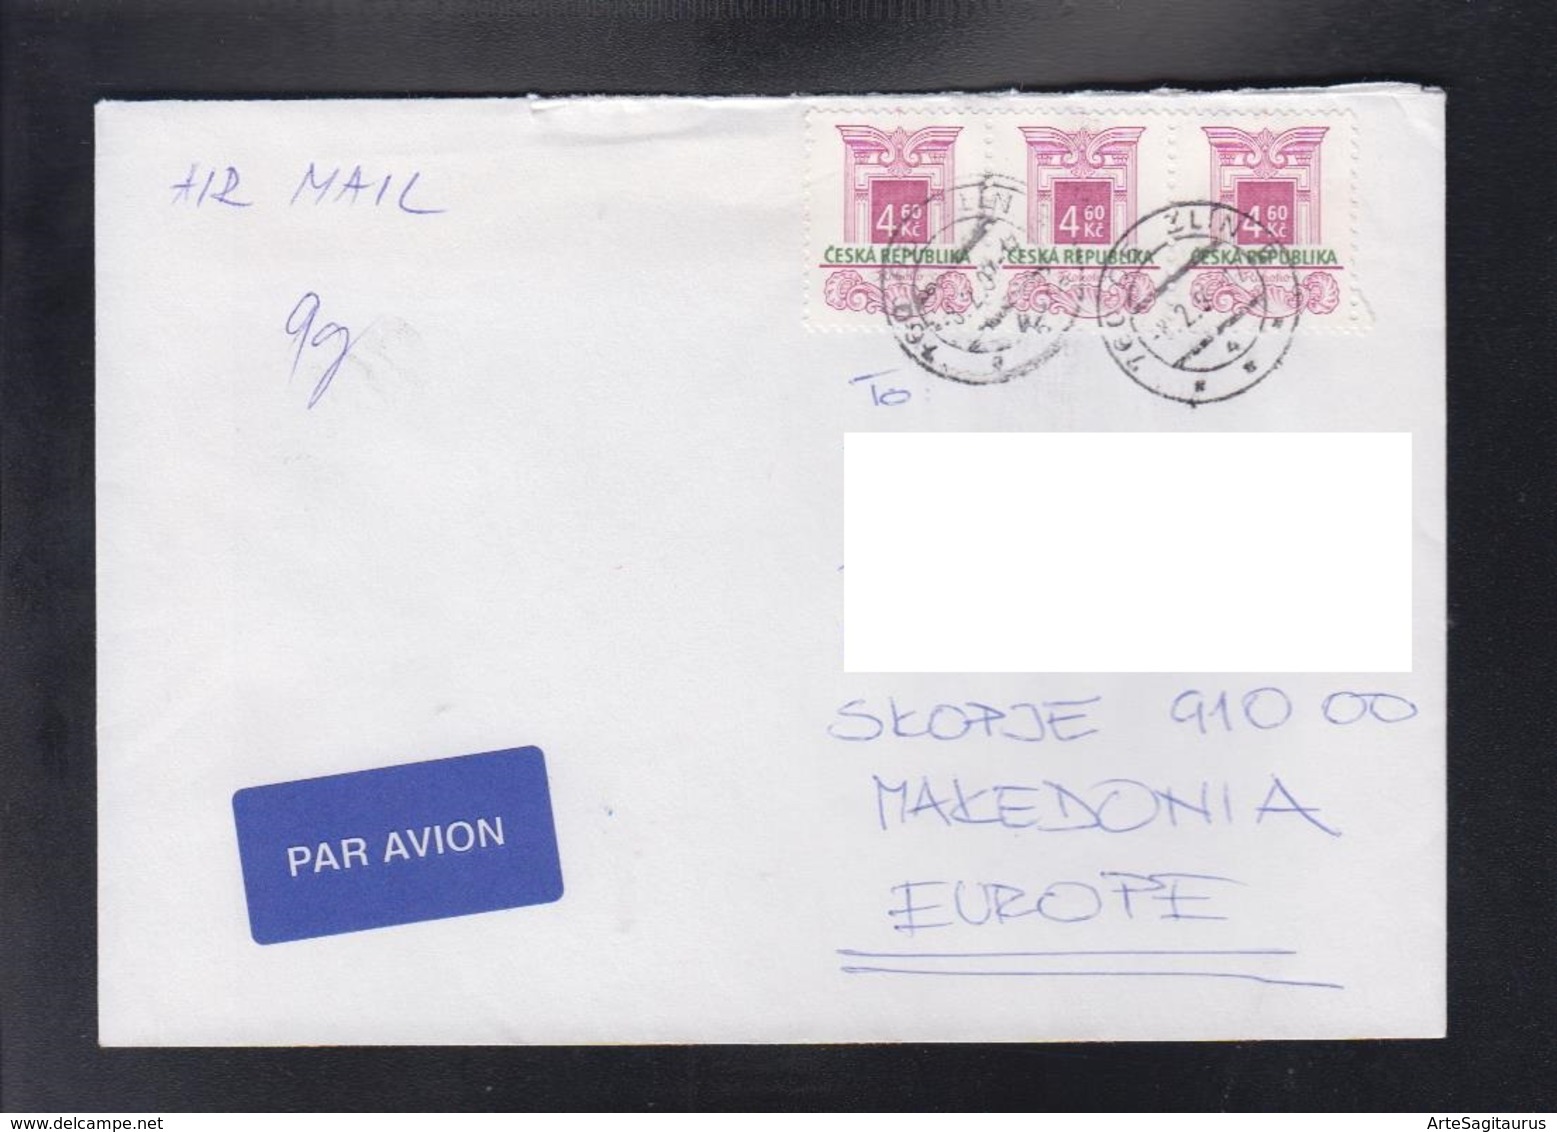 CHECS REPUBLIC / AIR MAIL, REPUBLIC OF MACEDONIA ** - Covers & Documents